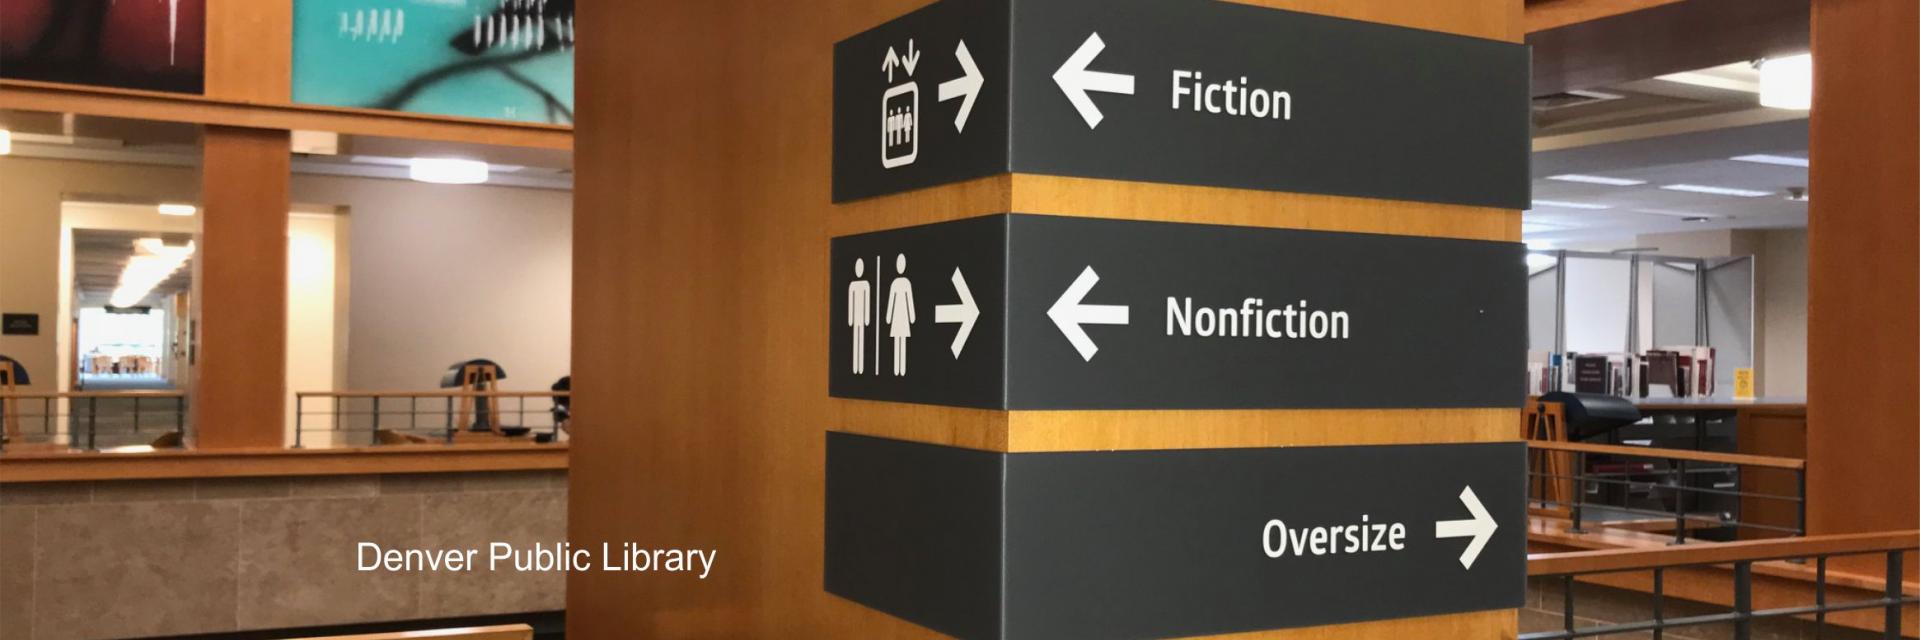 Libraries, directional signs